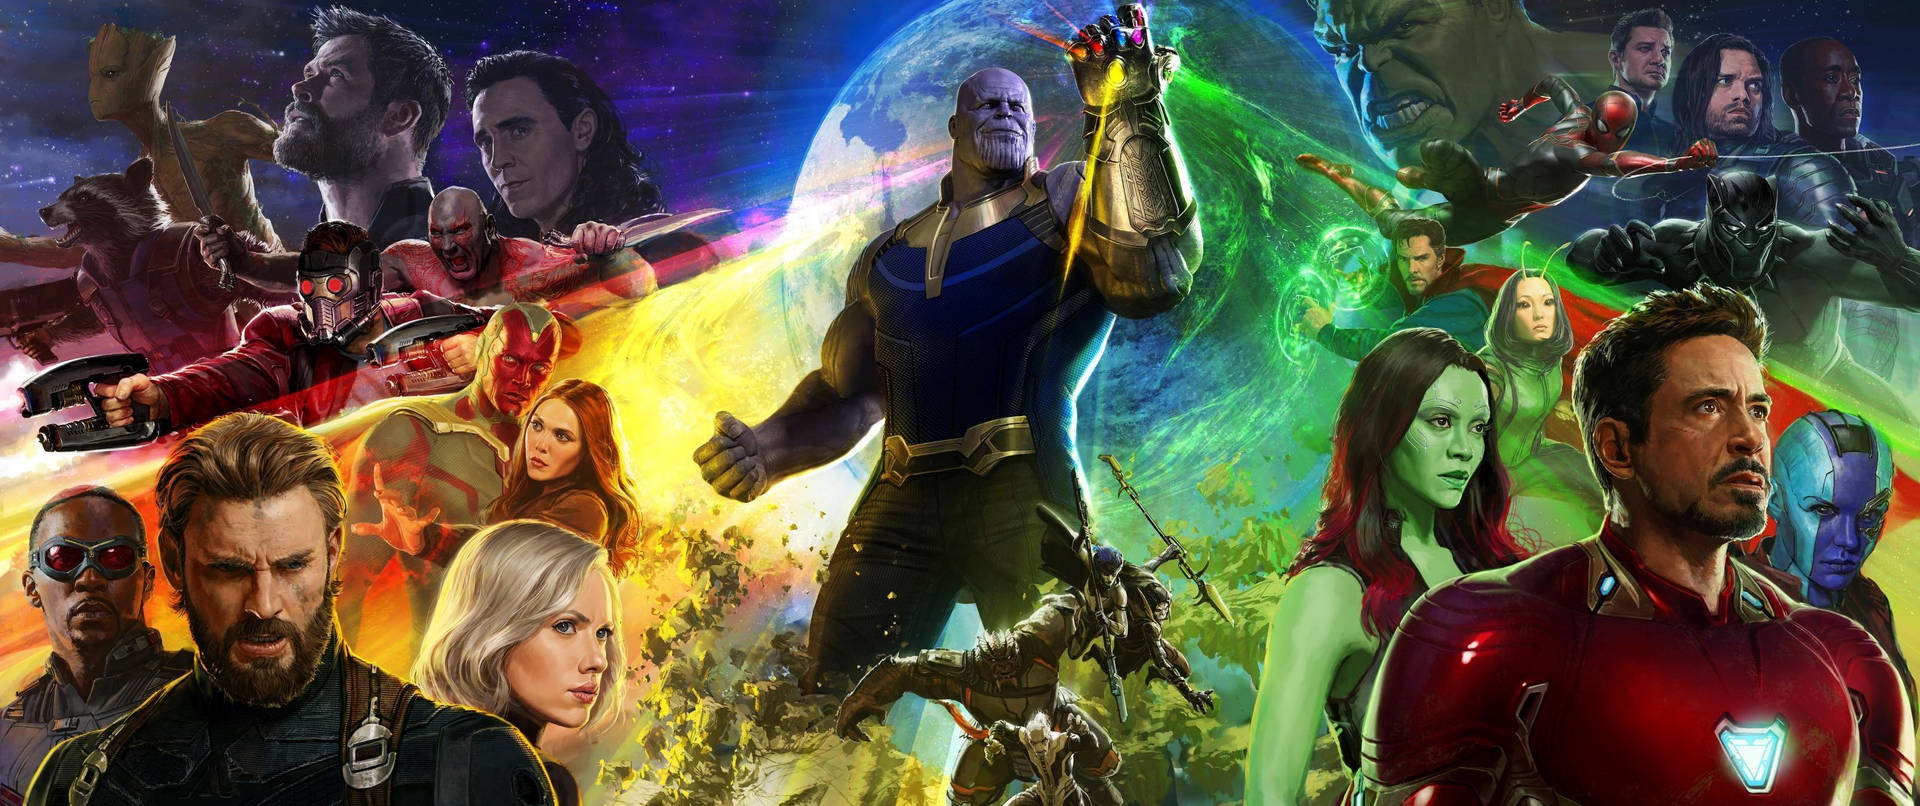 Avengers Superheroes in a one background with their enemy in center.